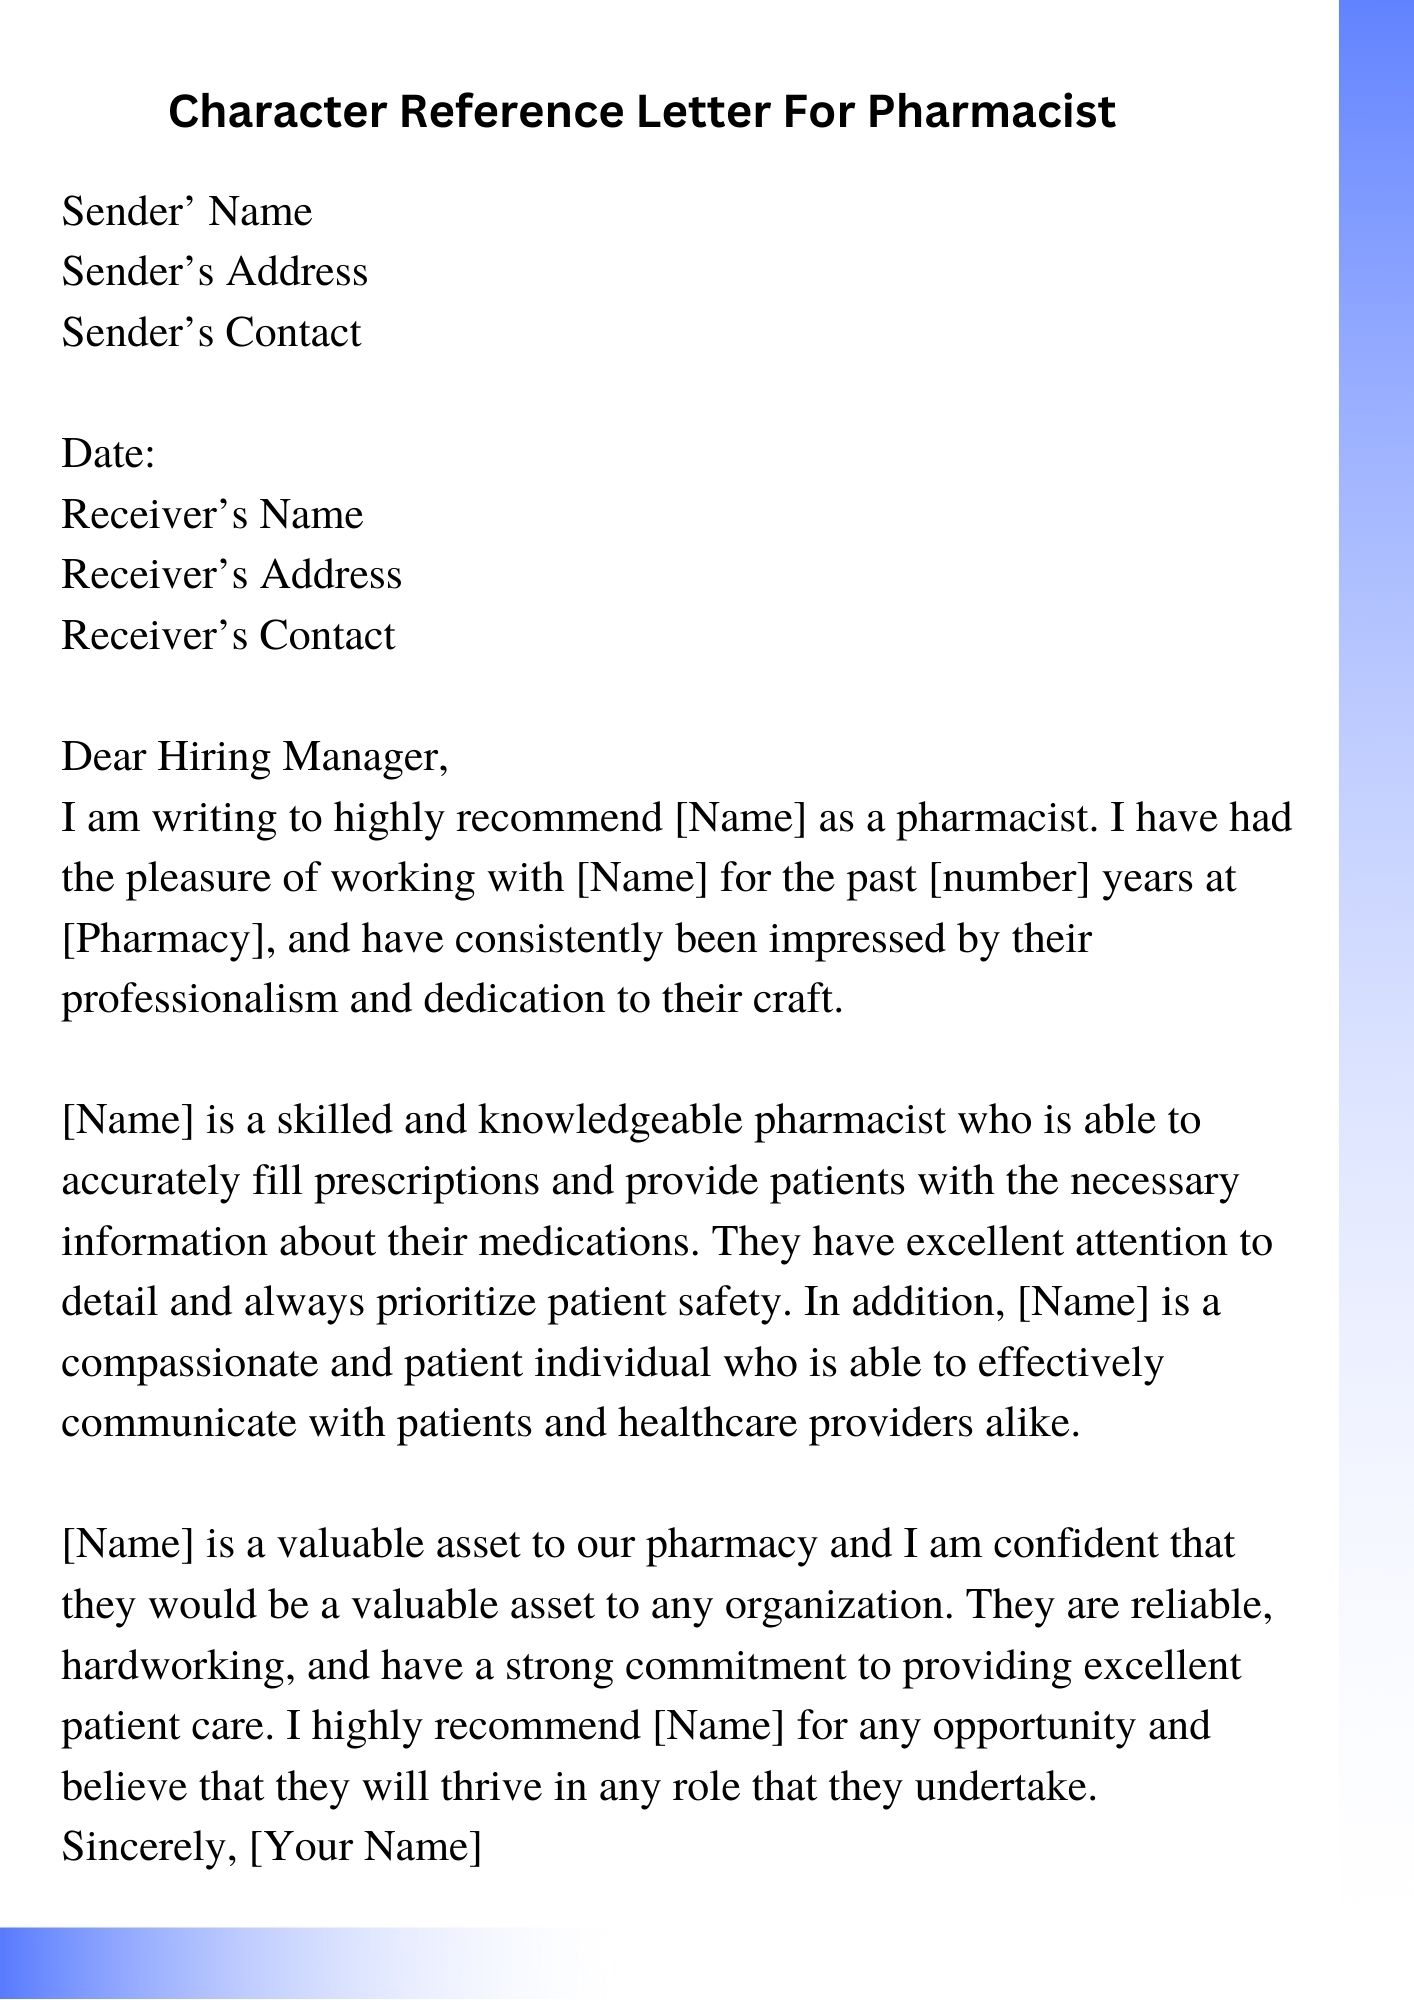 Character Reference Letter For Pharmacist